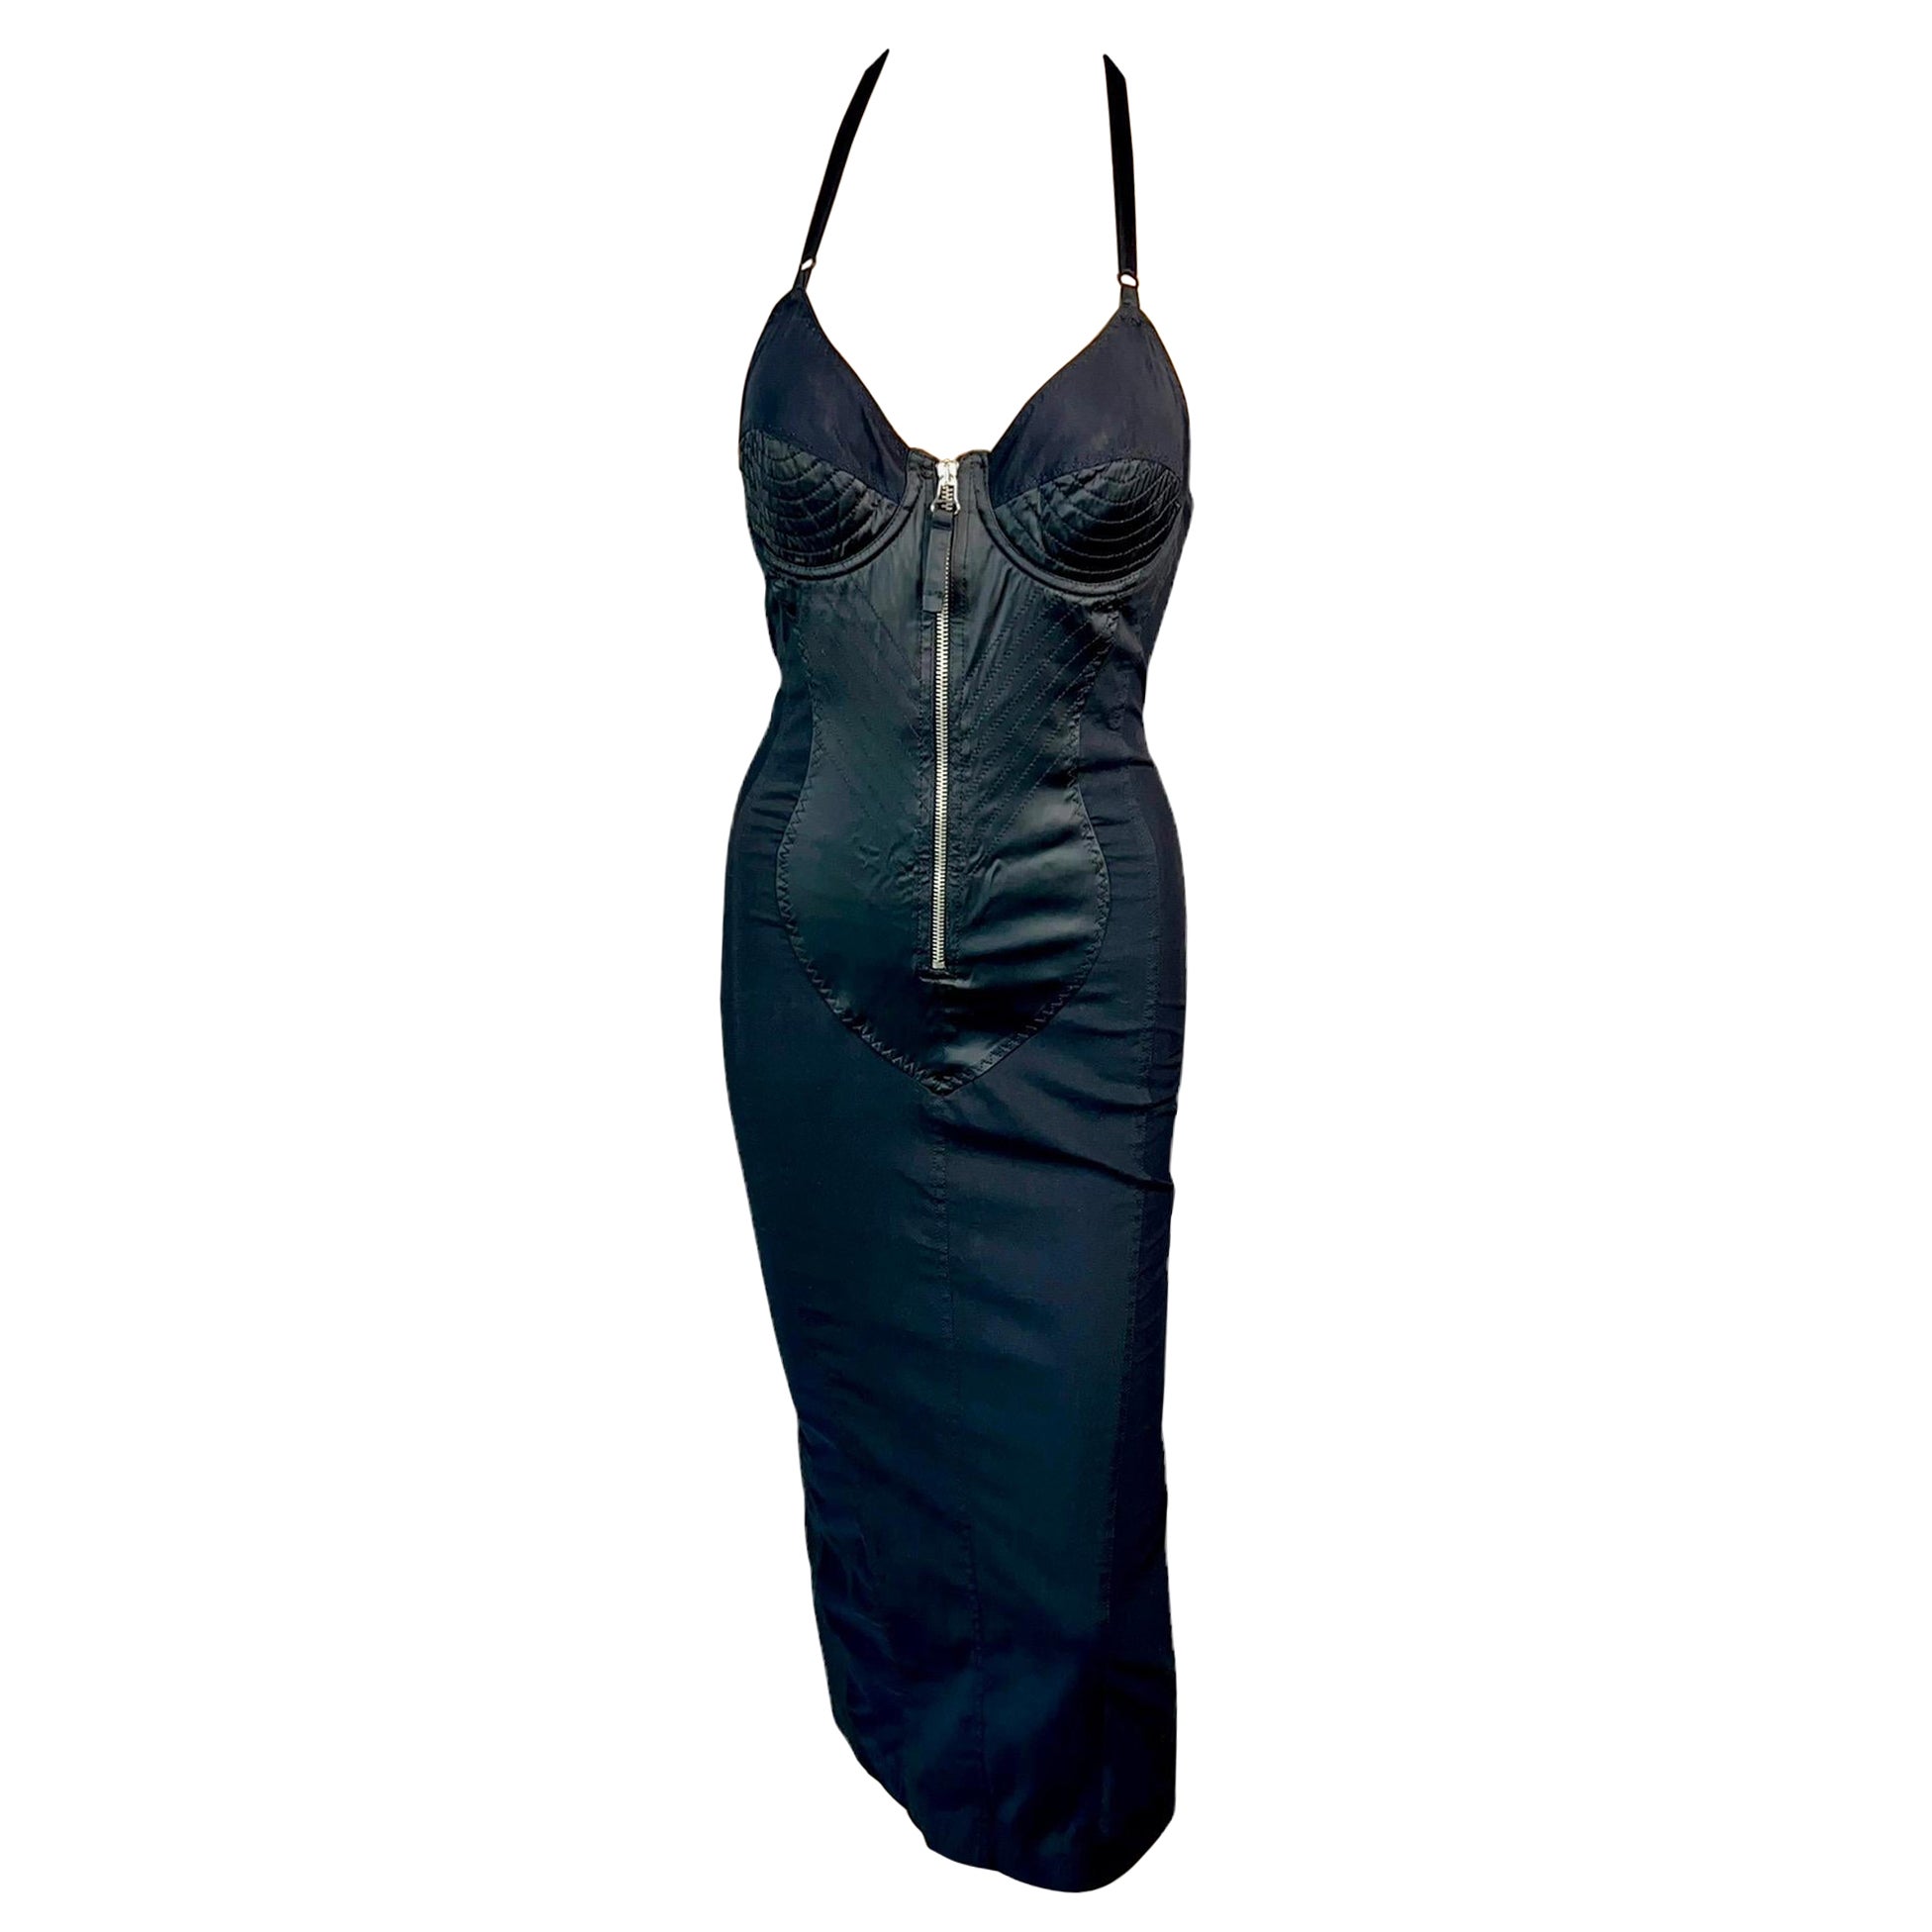 Jean Paul Gaultier The Jean in Blue Womens Clothing Lingerie Corsets and bustier tops 